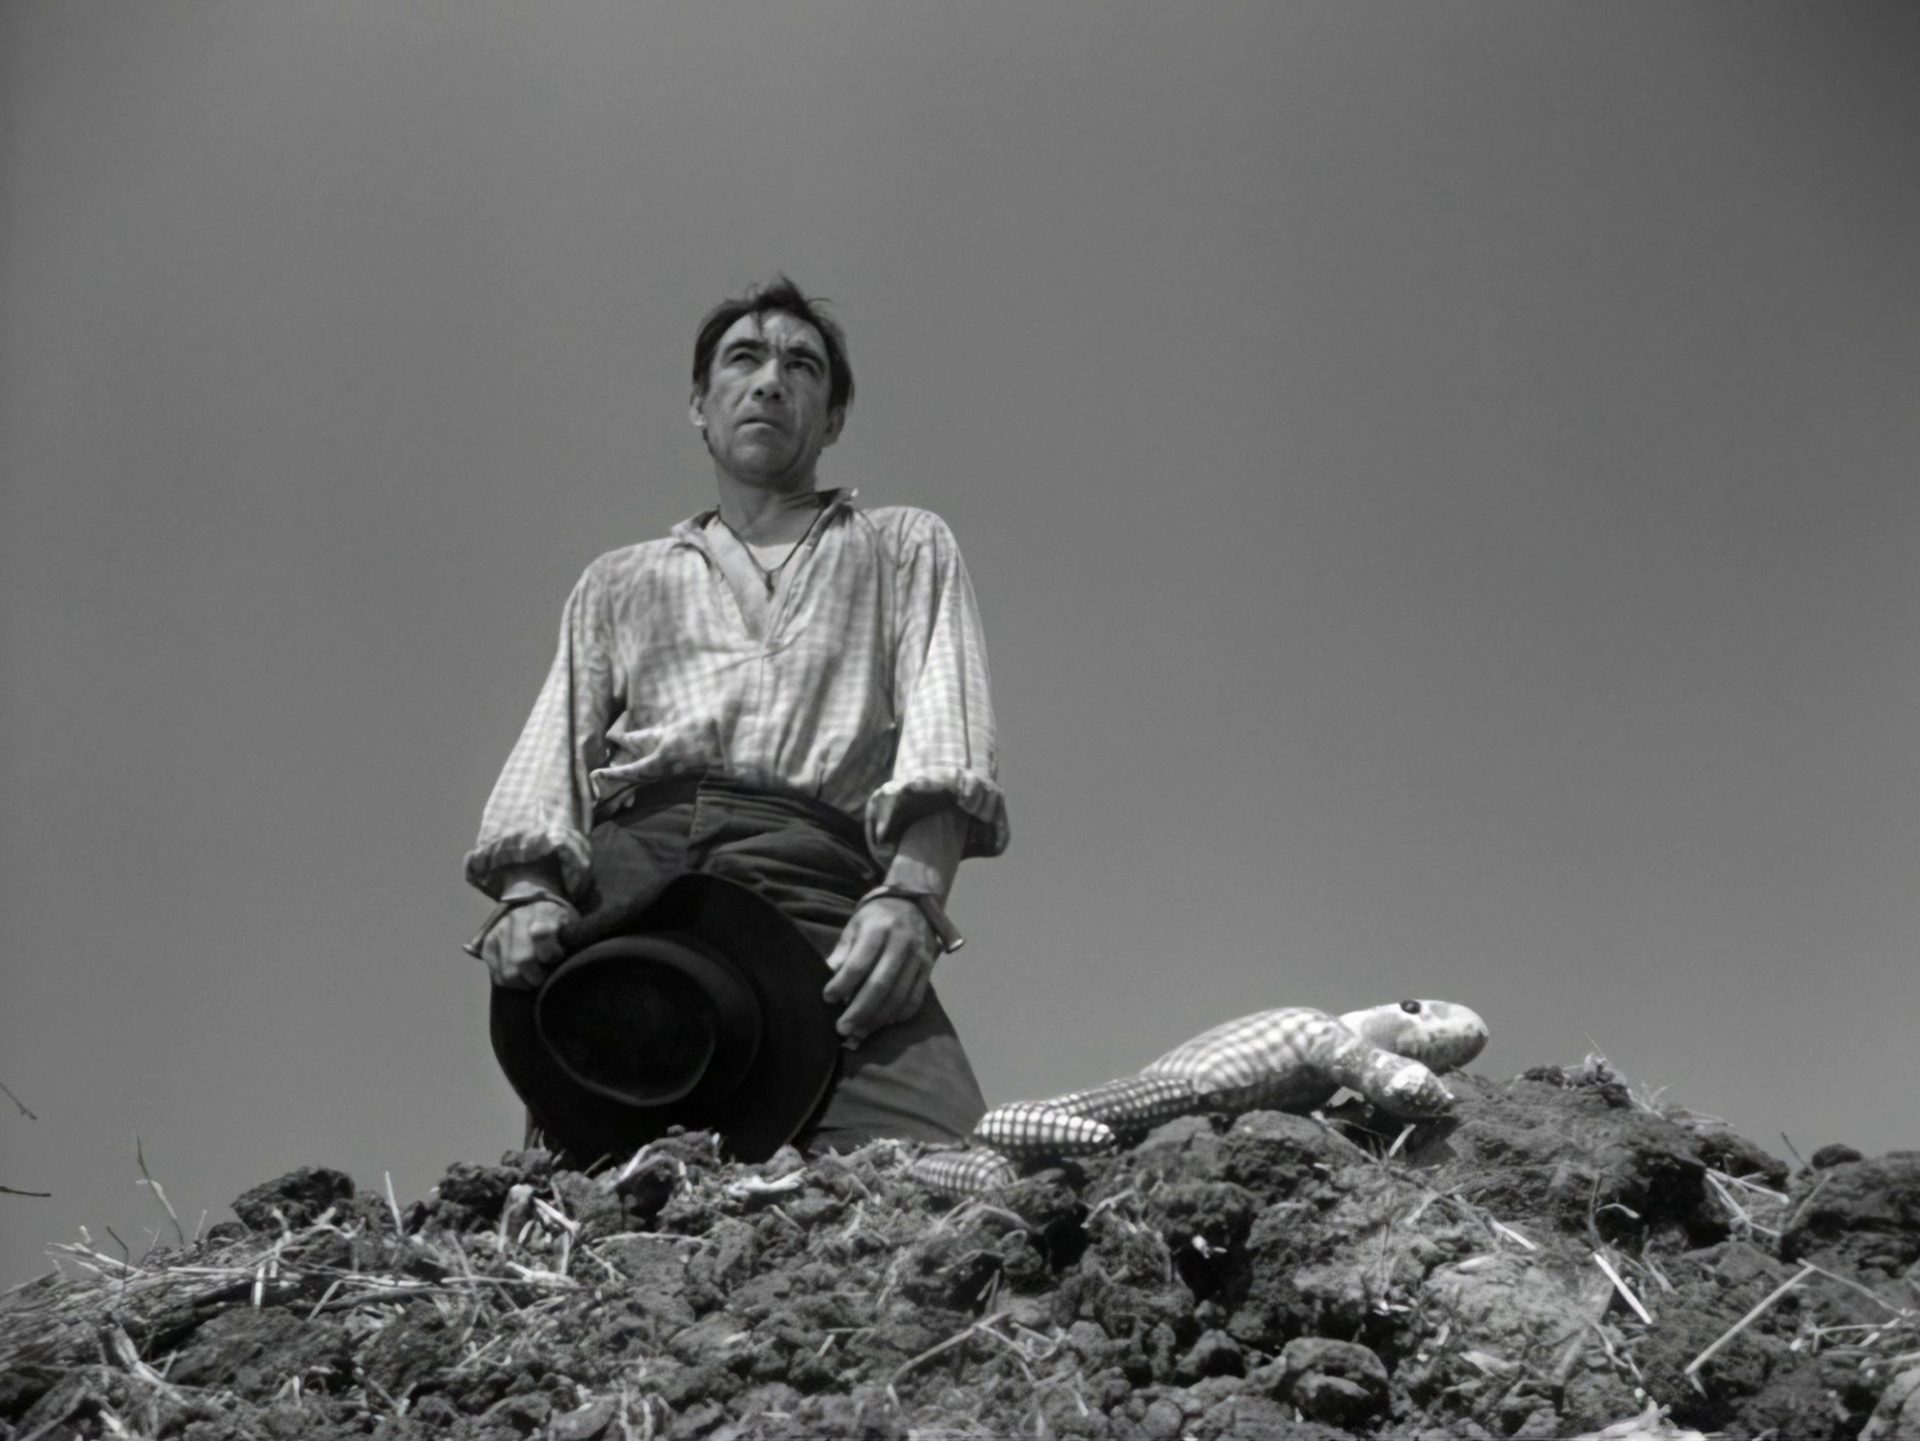 Black-and-white scene in which a jaded Anthony Quinn can be seen looking pensively into the distance from a frog’s-eye view of a burial mound on which a doll is lying.